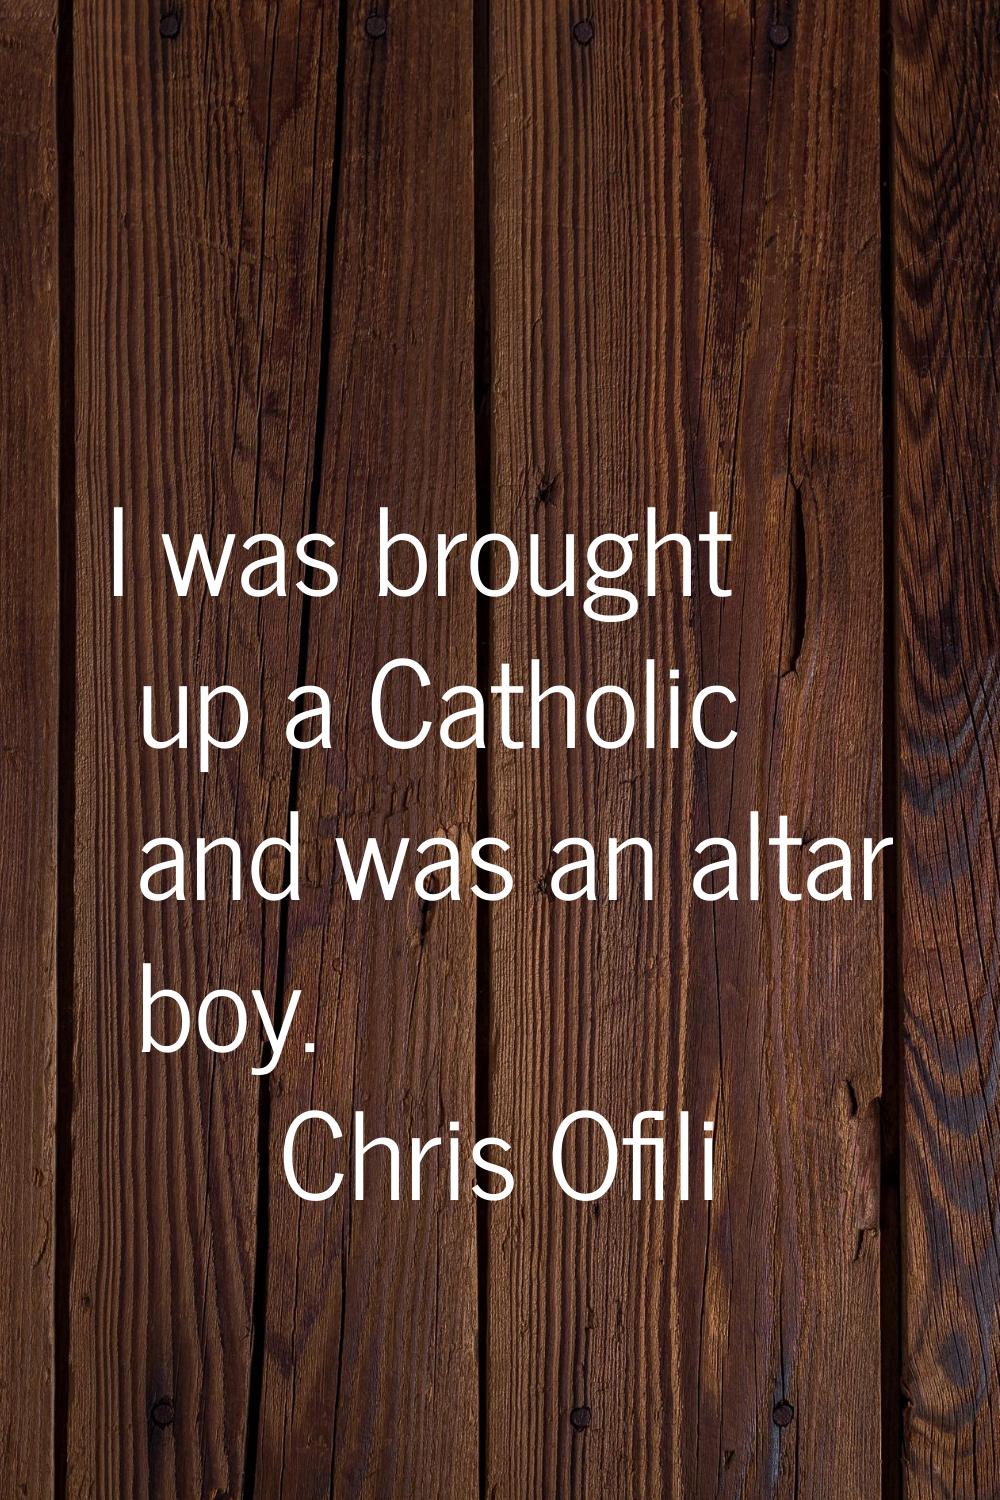 I was brought up a Catholic and was an altar boy.